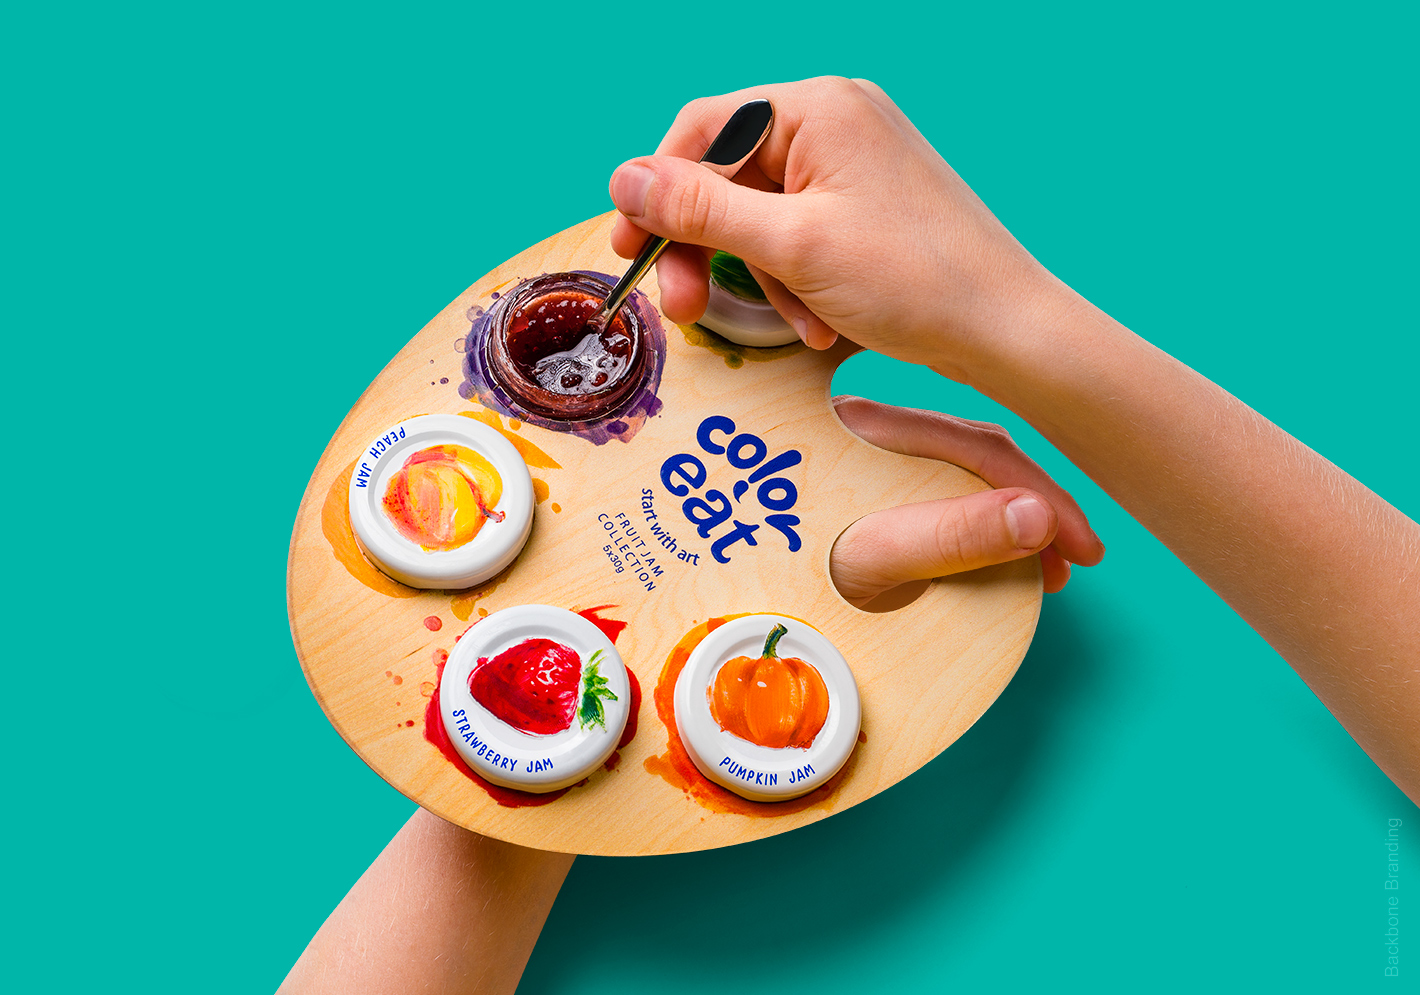 Color Eat Wants to Make Morning Breakfast Routines More Kid-Friendly